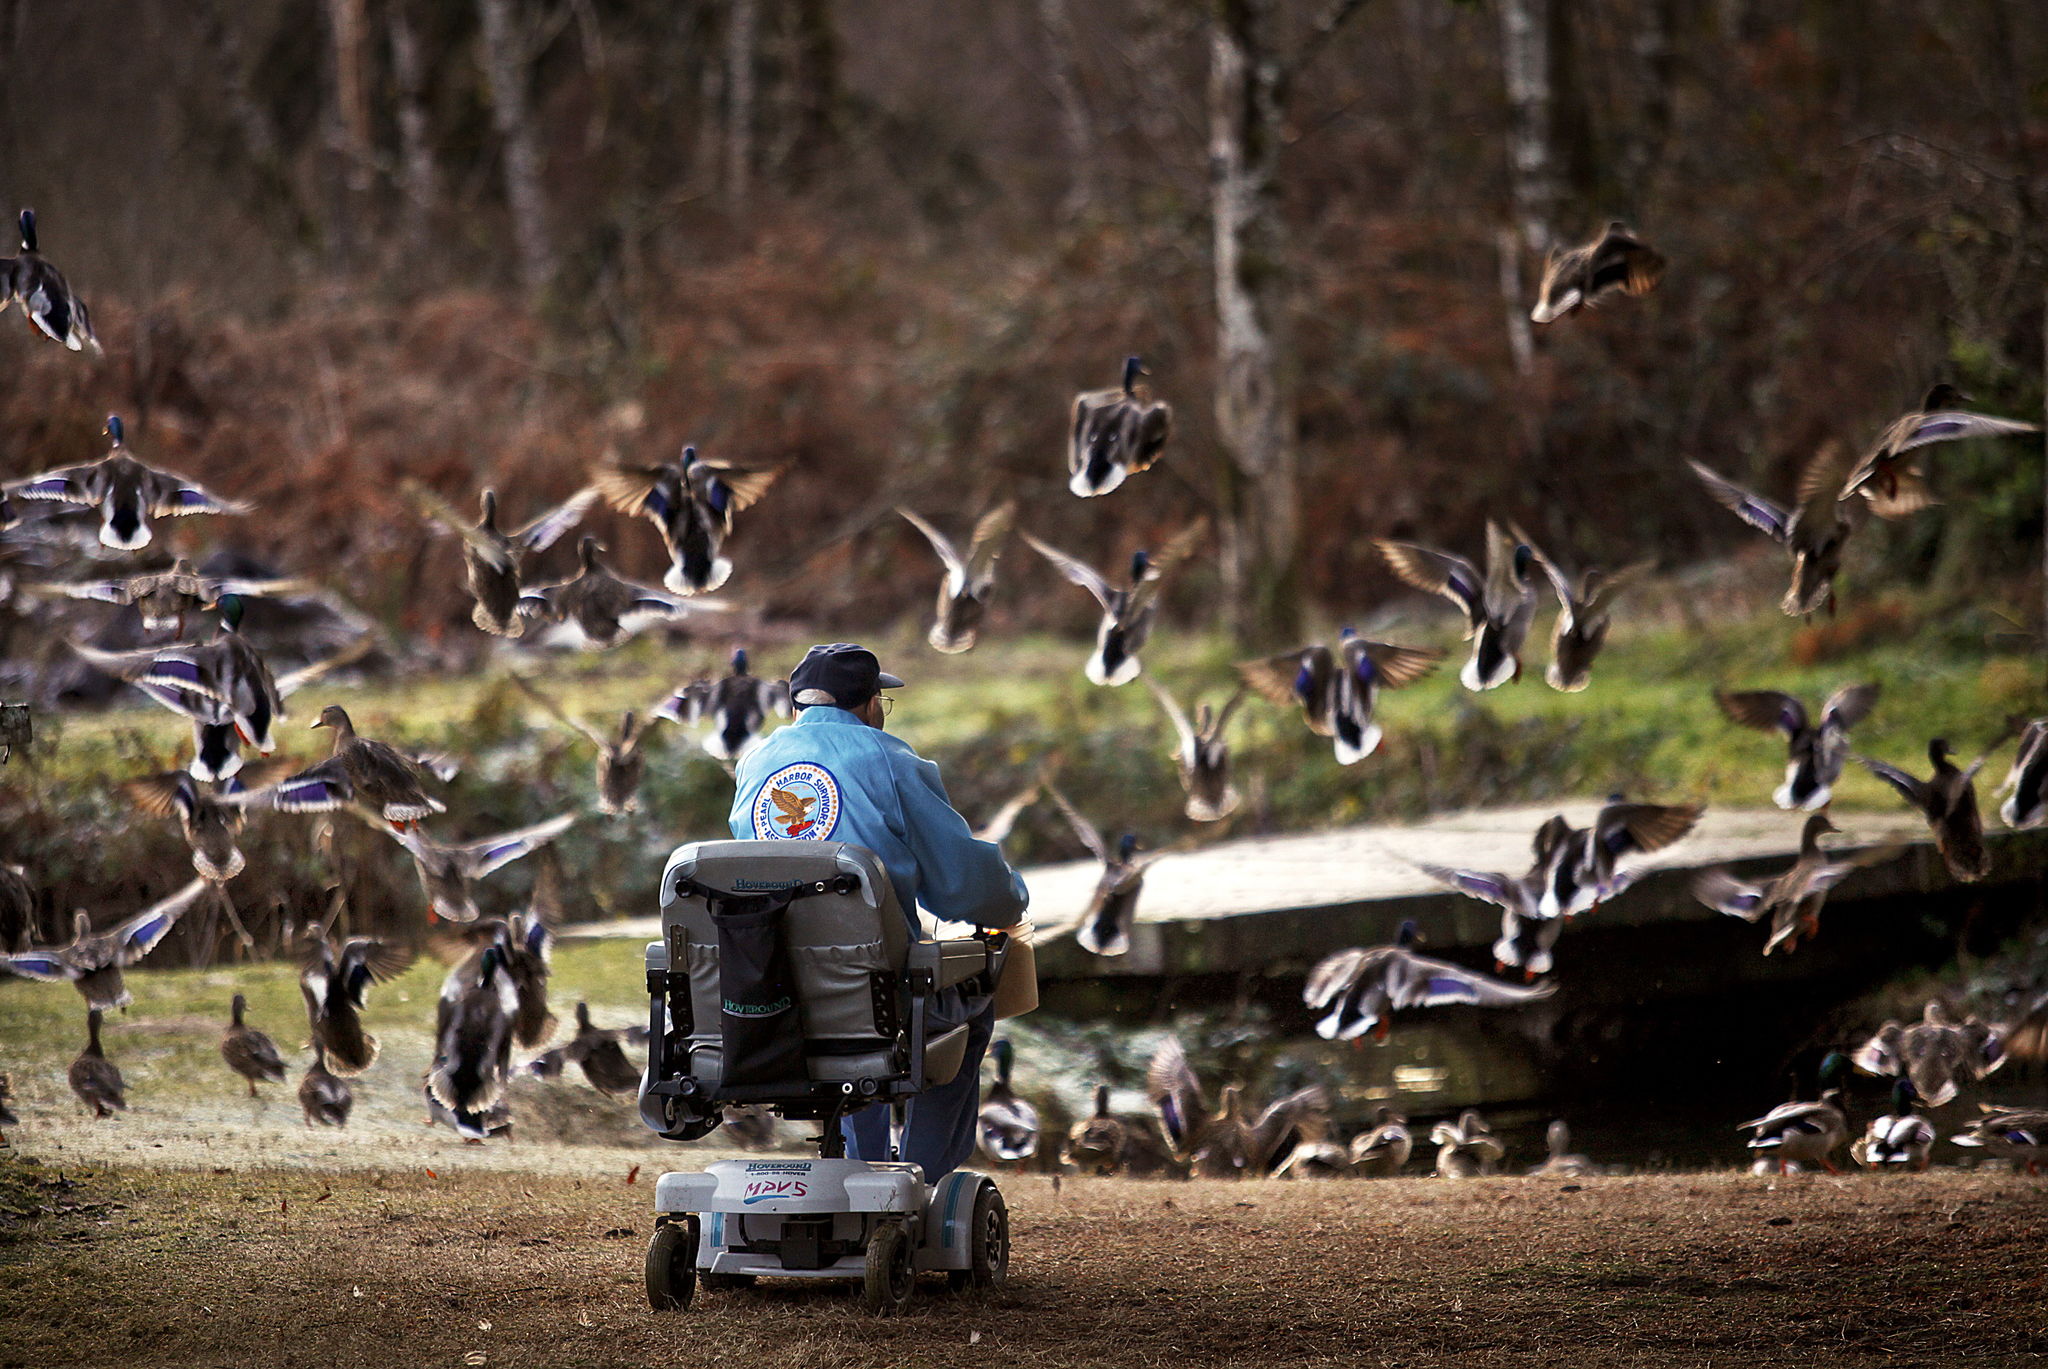 Pearl Harbor Survivor Walter Bailey enjoyed feeding cracked corn to the wild Mallard ducks that gathered for him, just outside his home. This photo was taken Dec. 4, 2013.